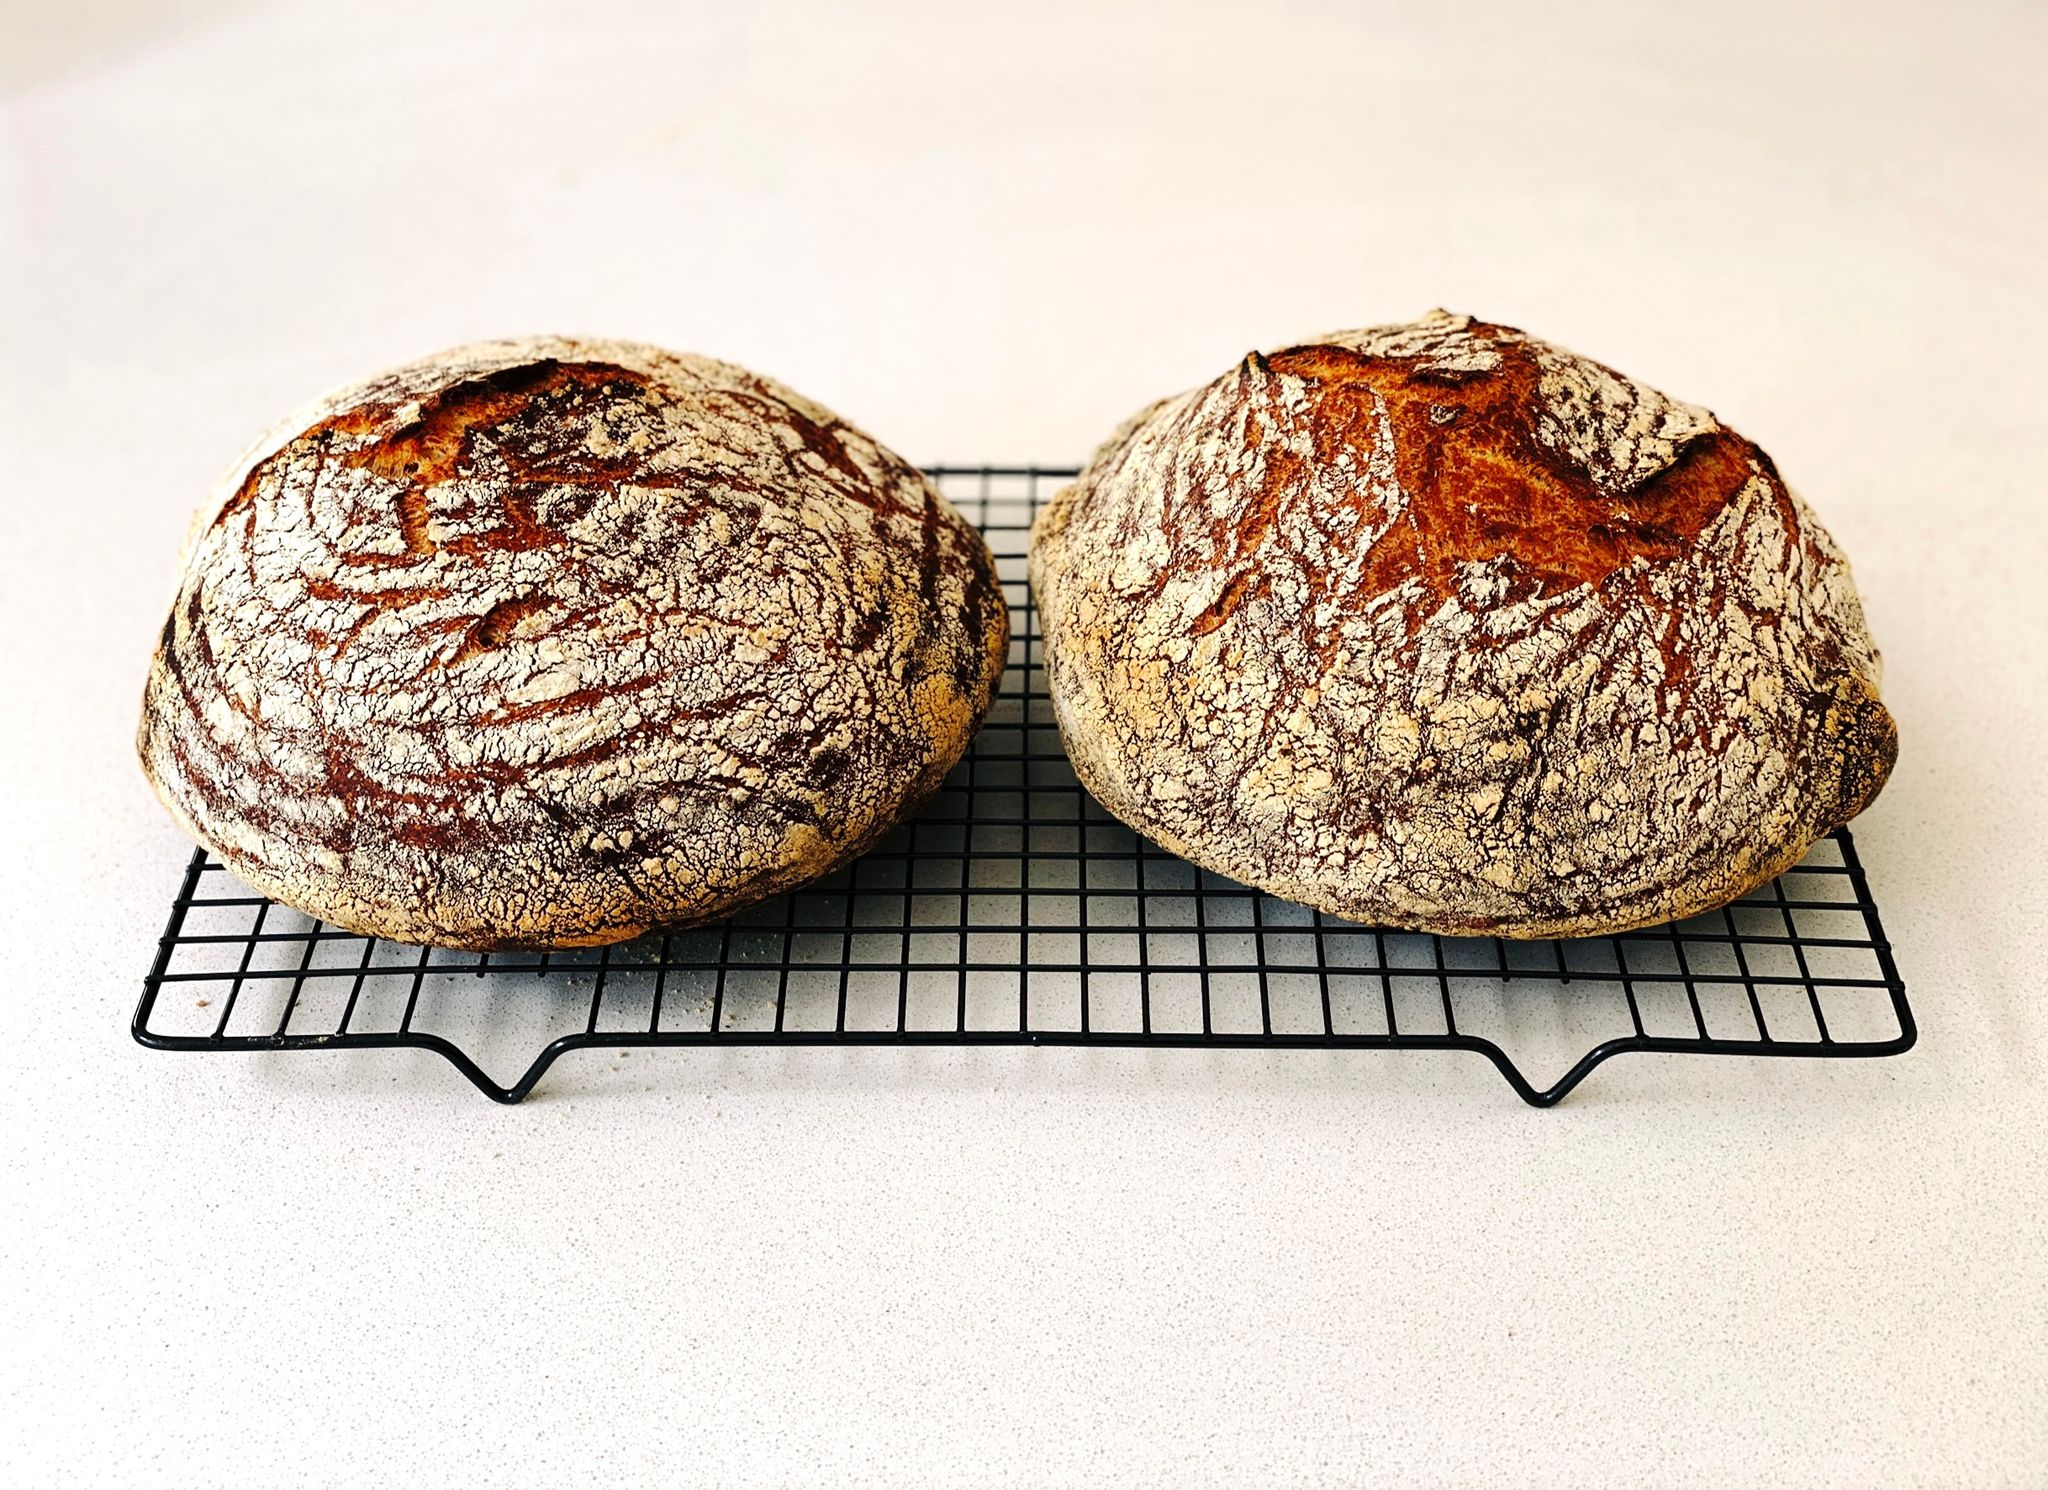 A photo of two round flour-covered golden-brown loaves of bread sitting on a cooling rack.